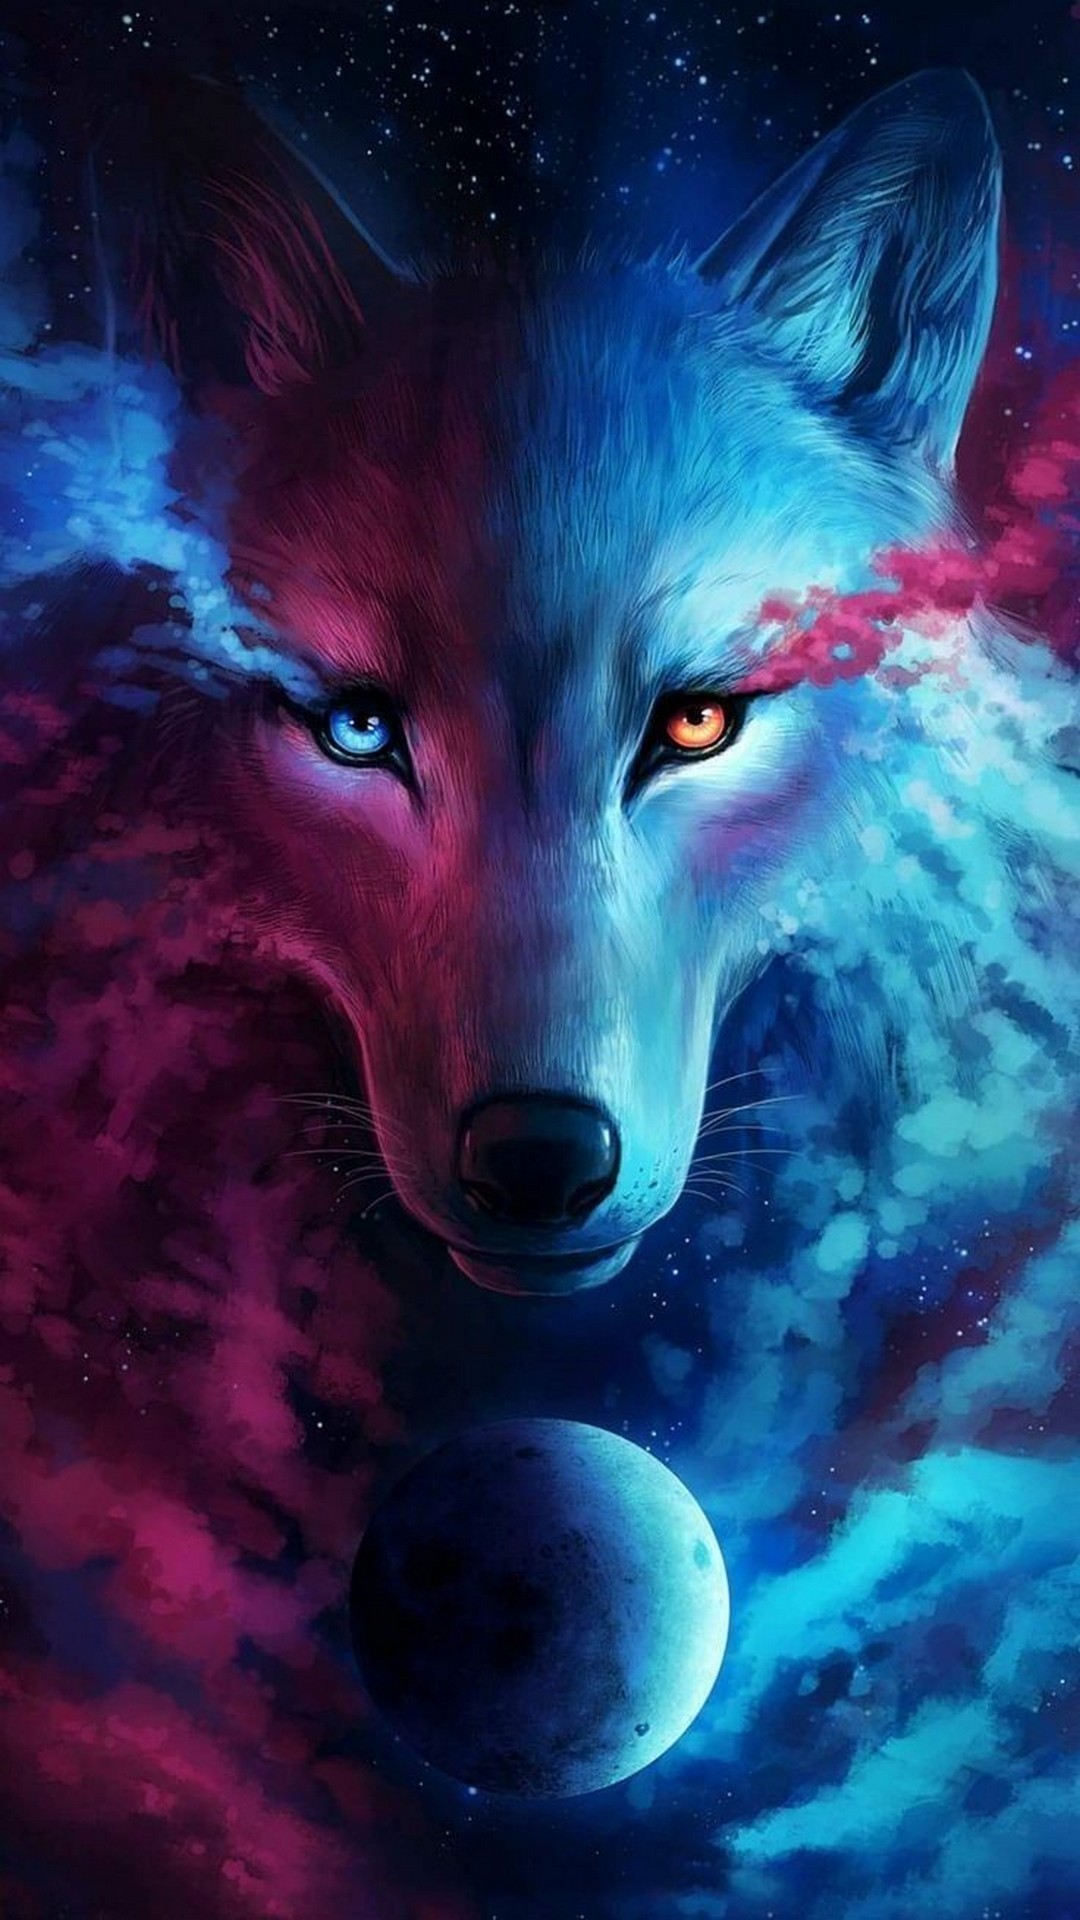 iPhone Wallpaper HD Cool Wolf With high-resolution 1080X1920 pixel. You can use this wallpaper for your iPhone 5, 6, 7, 8, X, XS, XR backgrounds, Mobile Screensaver, or iPad Lock Screen